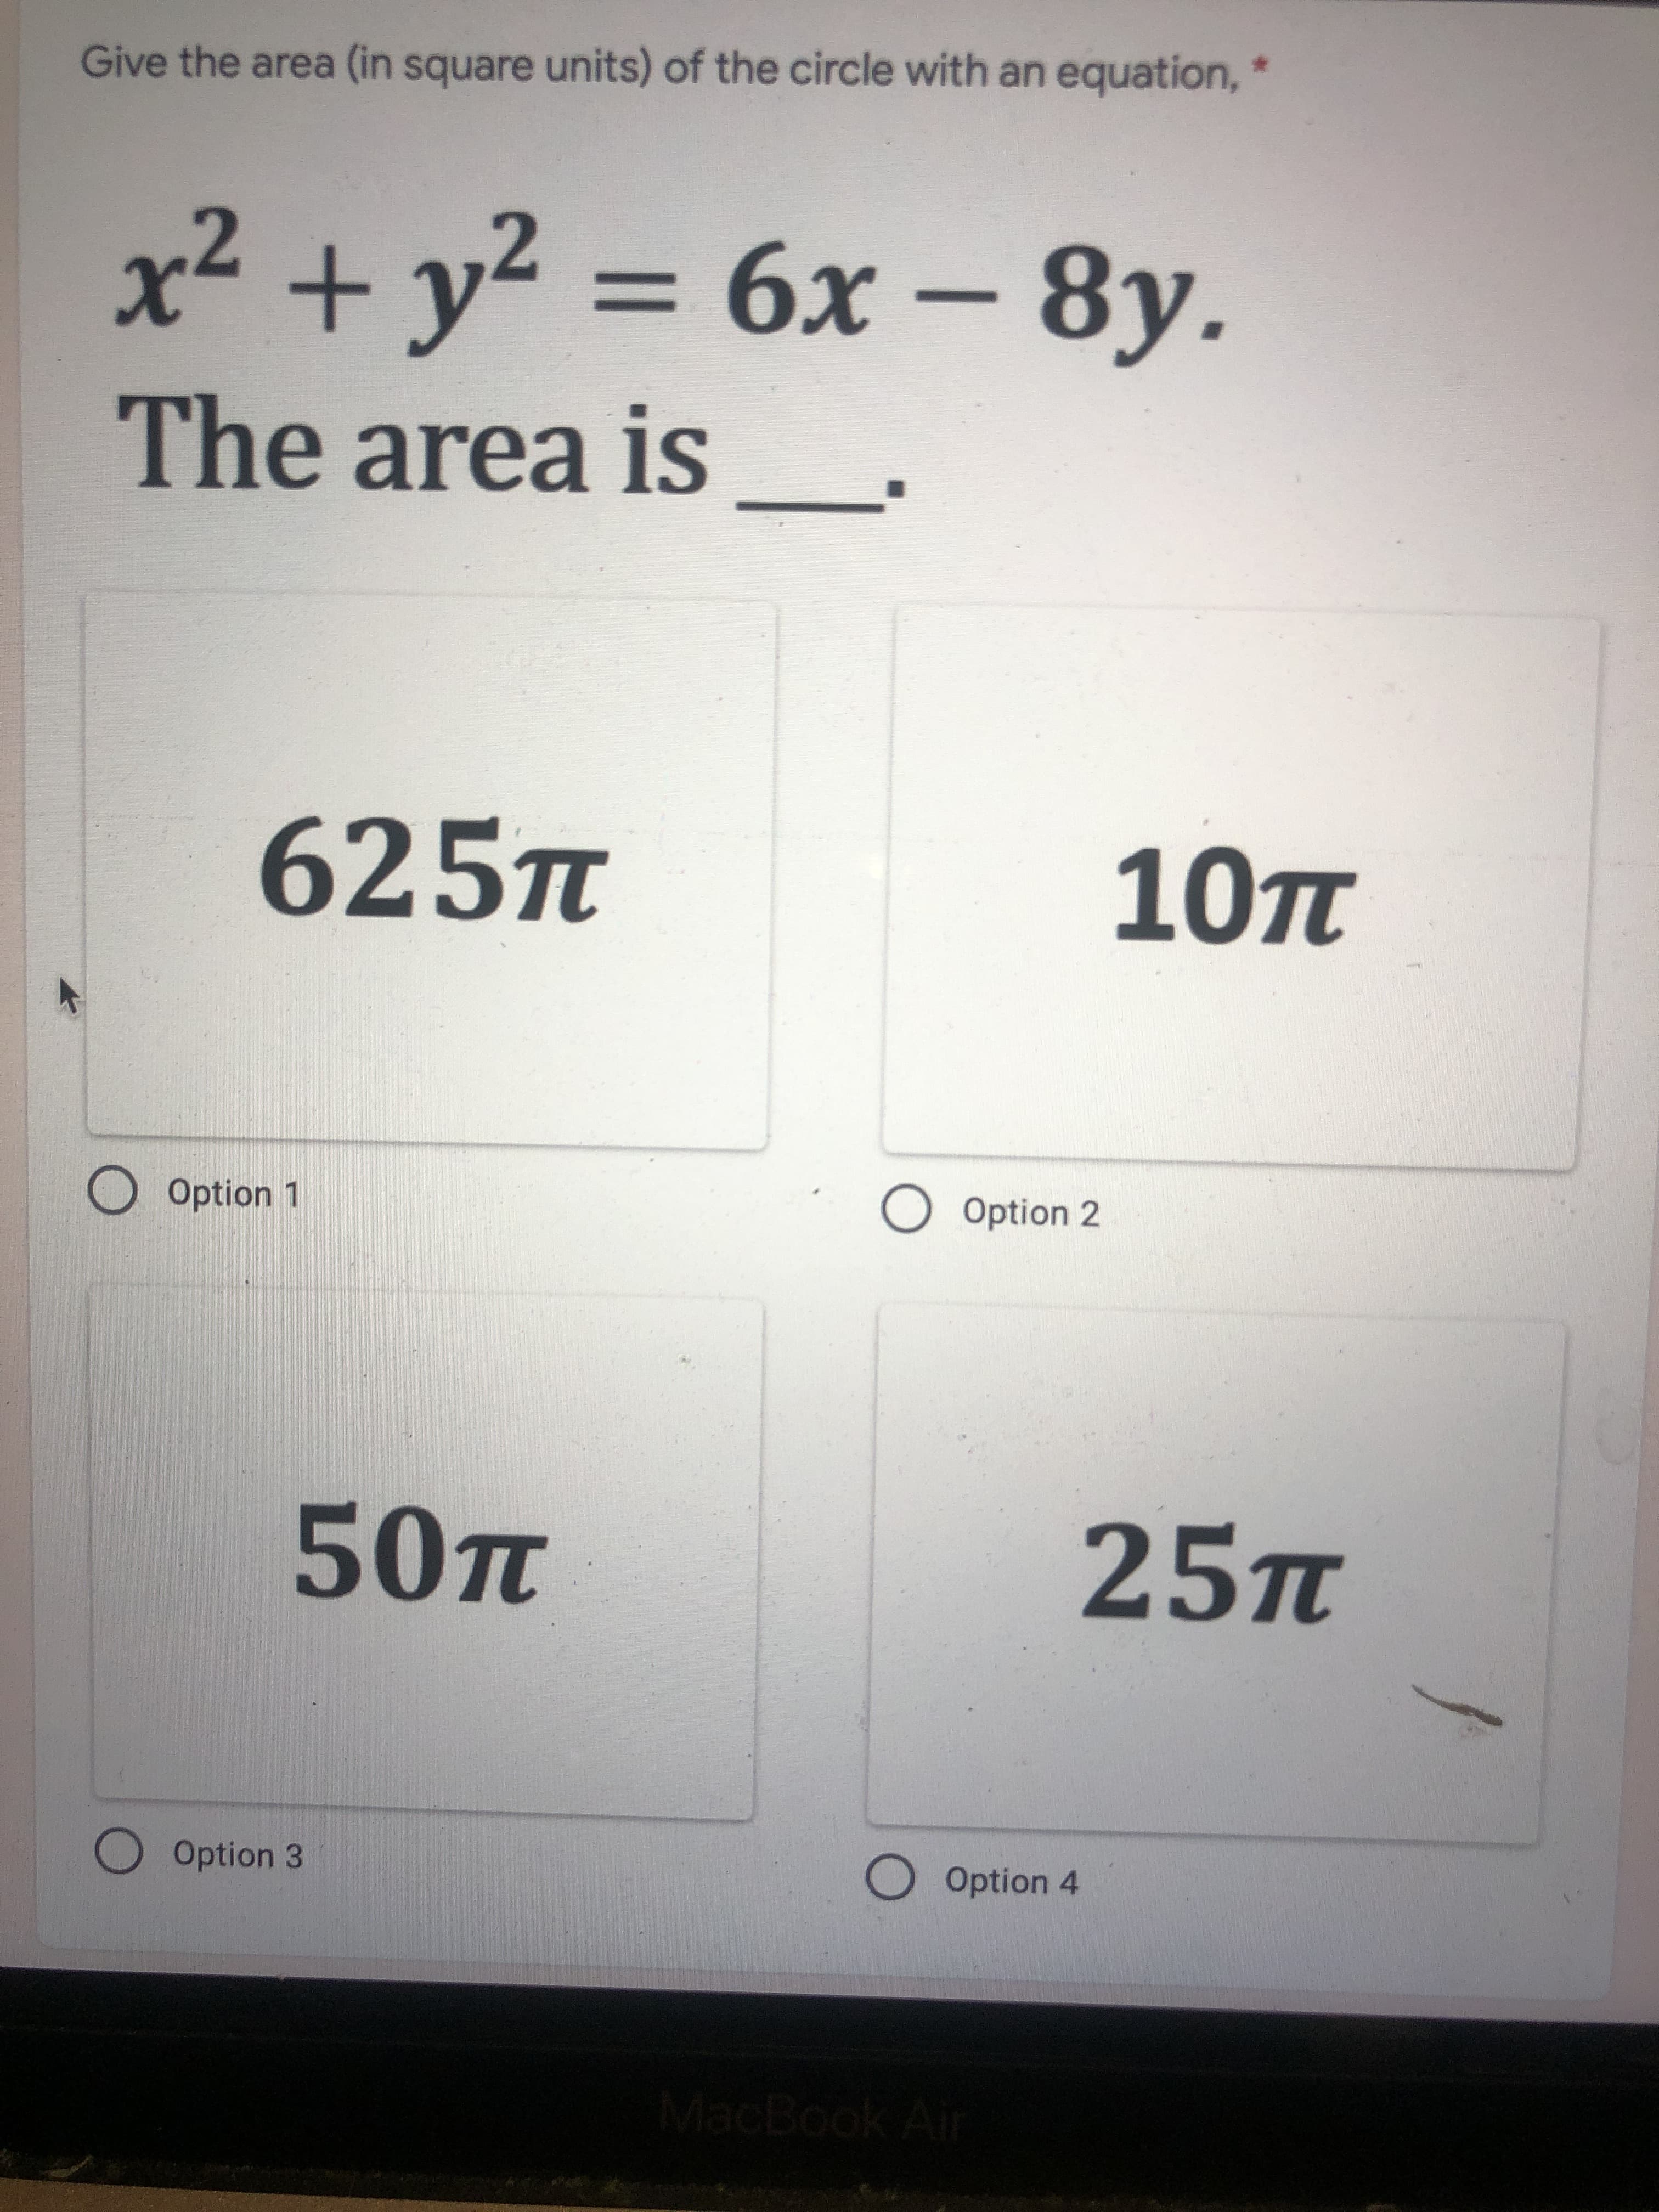 Give the area (in square units) of the circle with an equation,
2:
The area iS
625п
10п
O Option 2
25T
O Option 3
O Option 4
MacBook Air
